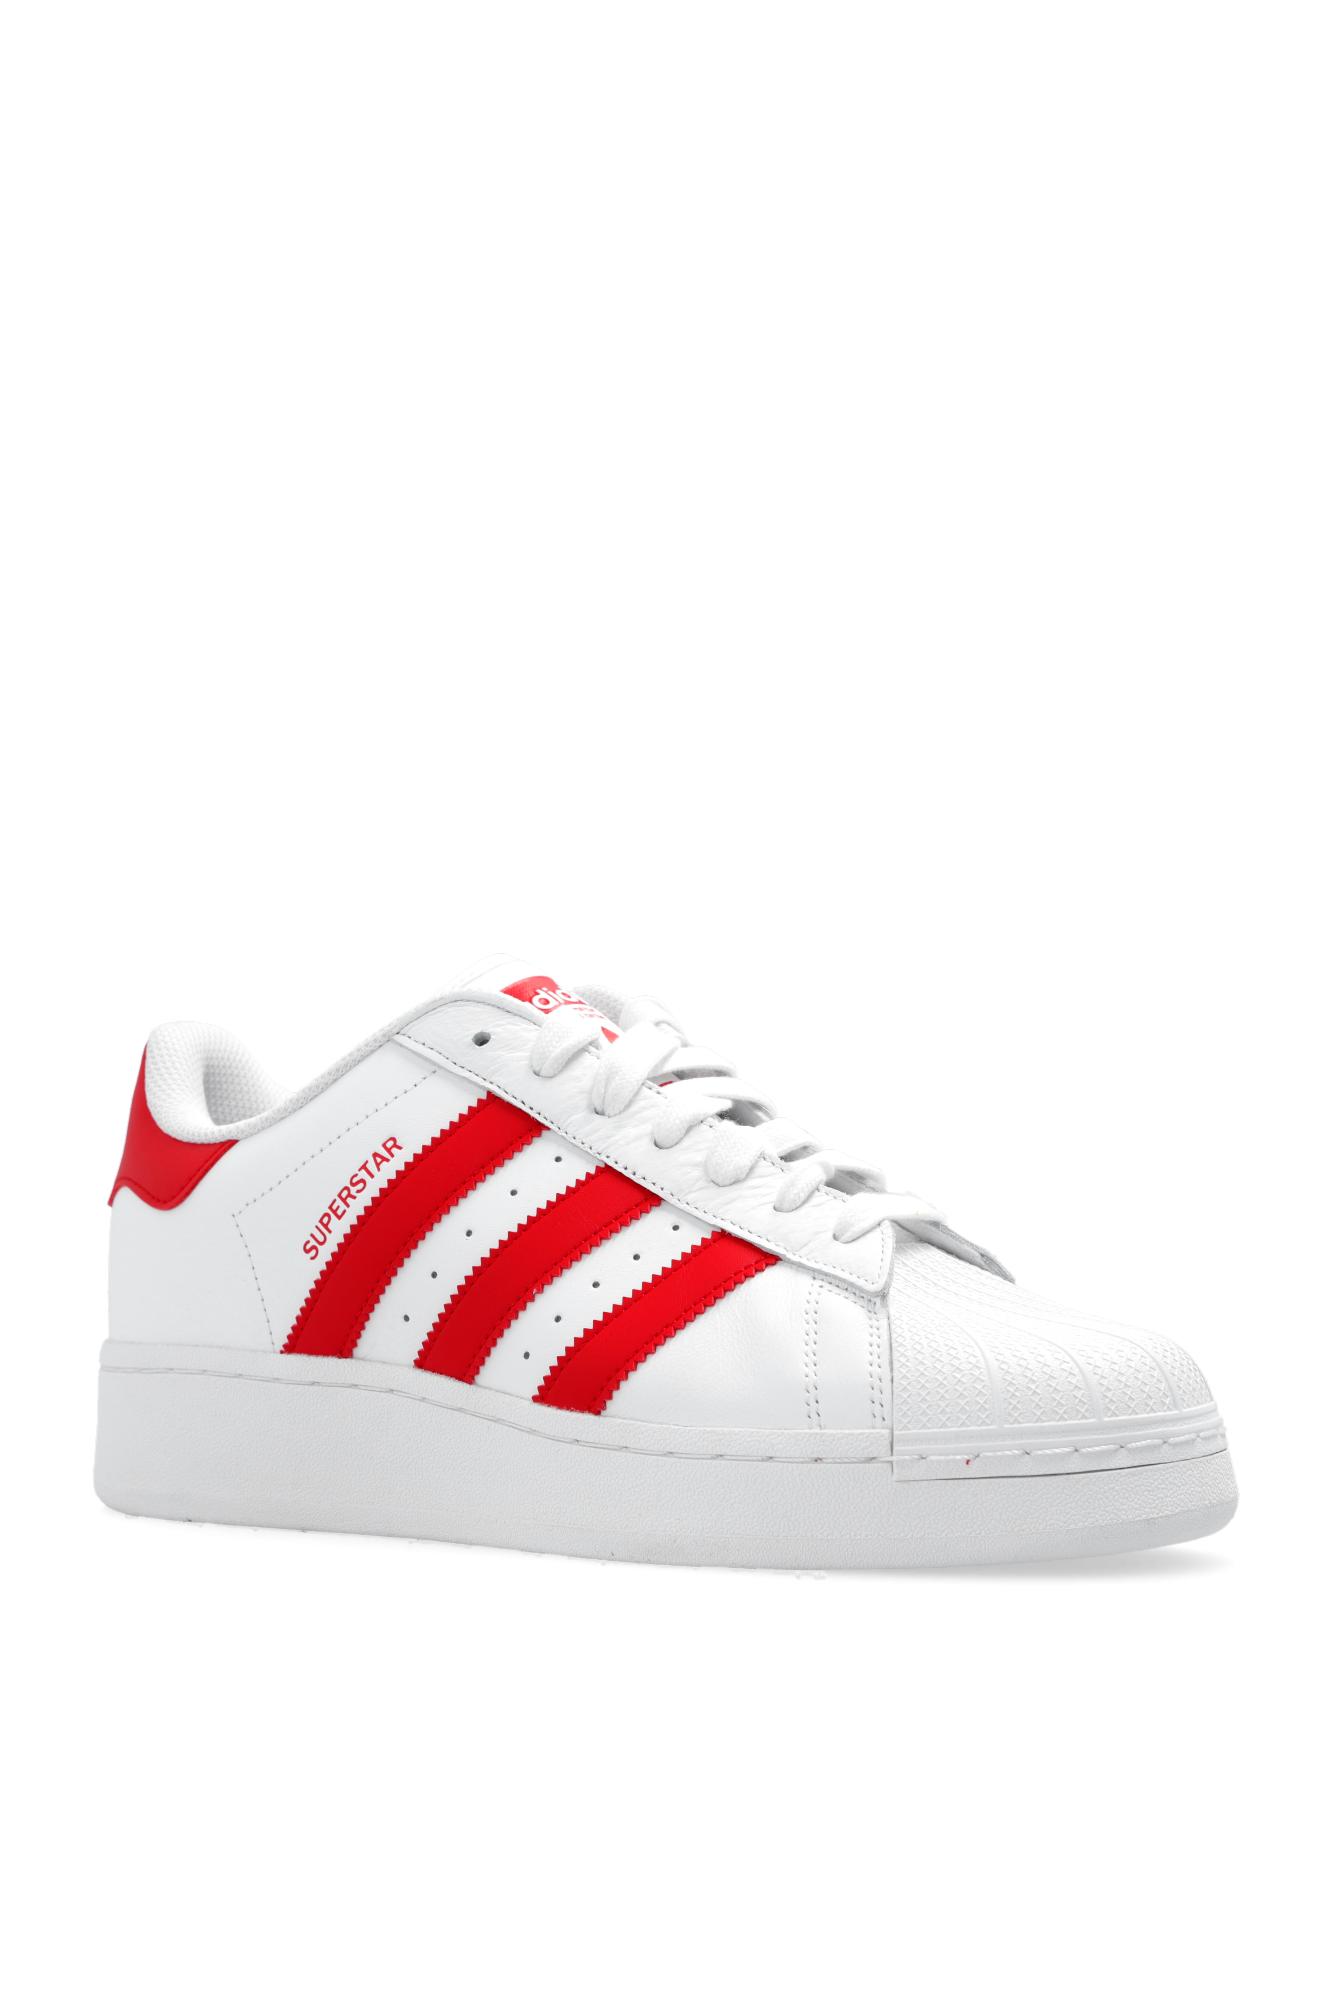 adidas Originals Superstar Leather Sneakers in Red | Lyst